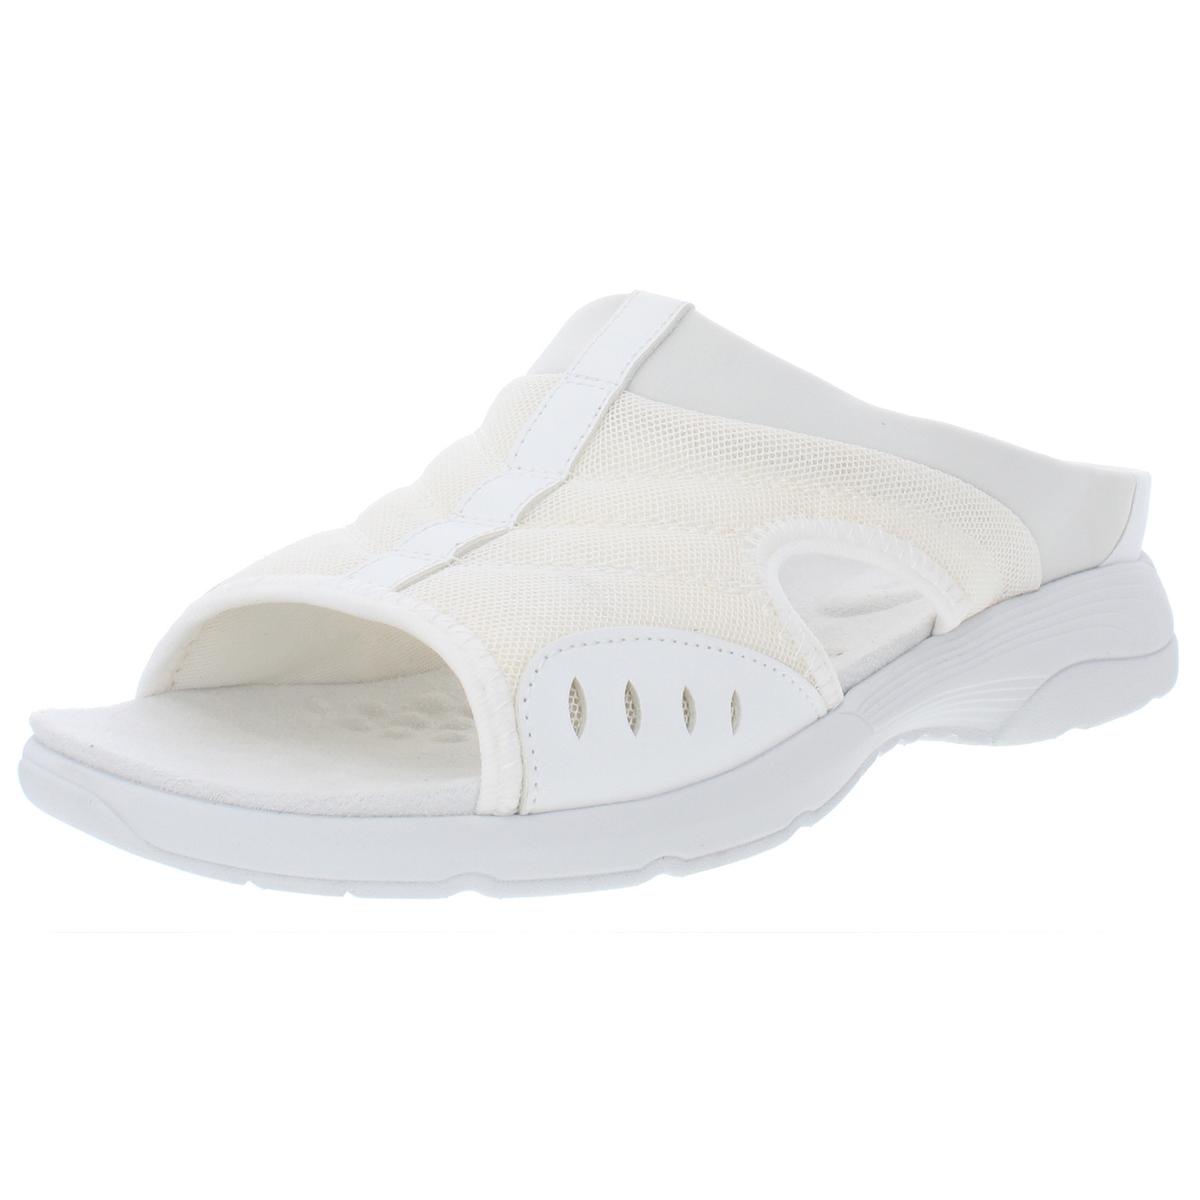 Easy Spirit Womens Traciee 2 Open Toe Stretch Slide Sandals Shoes BHFO ...